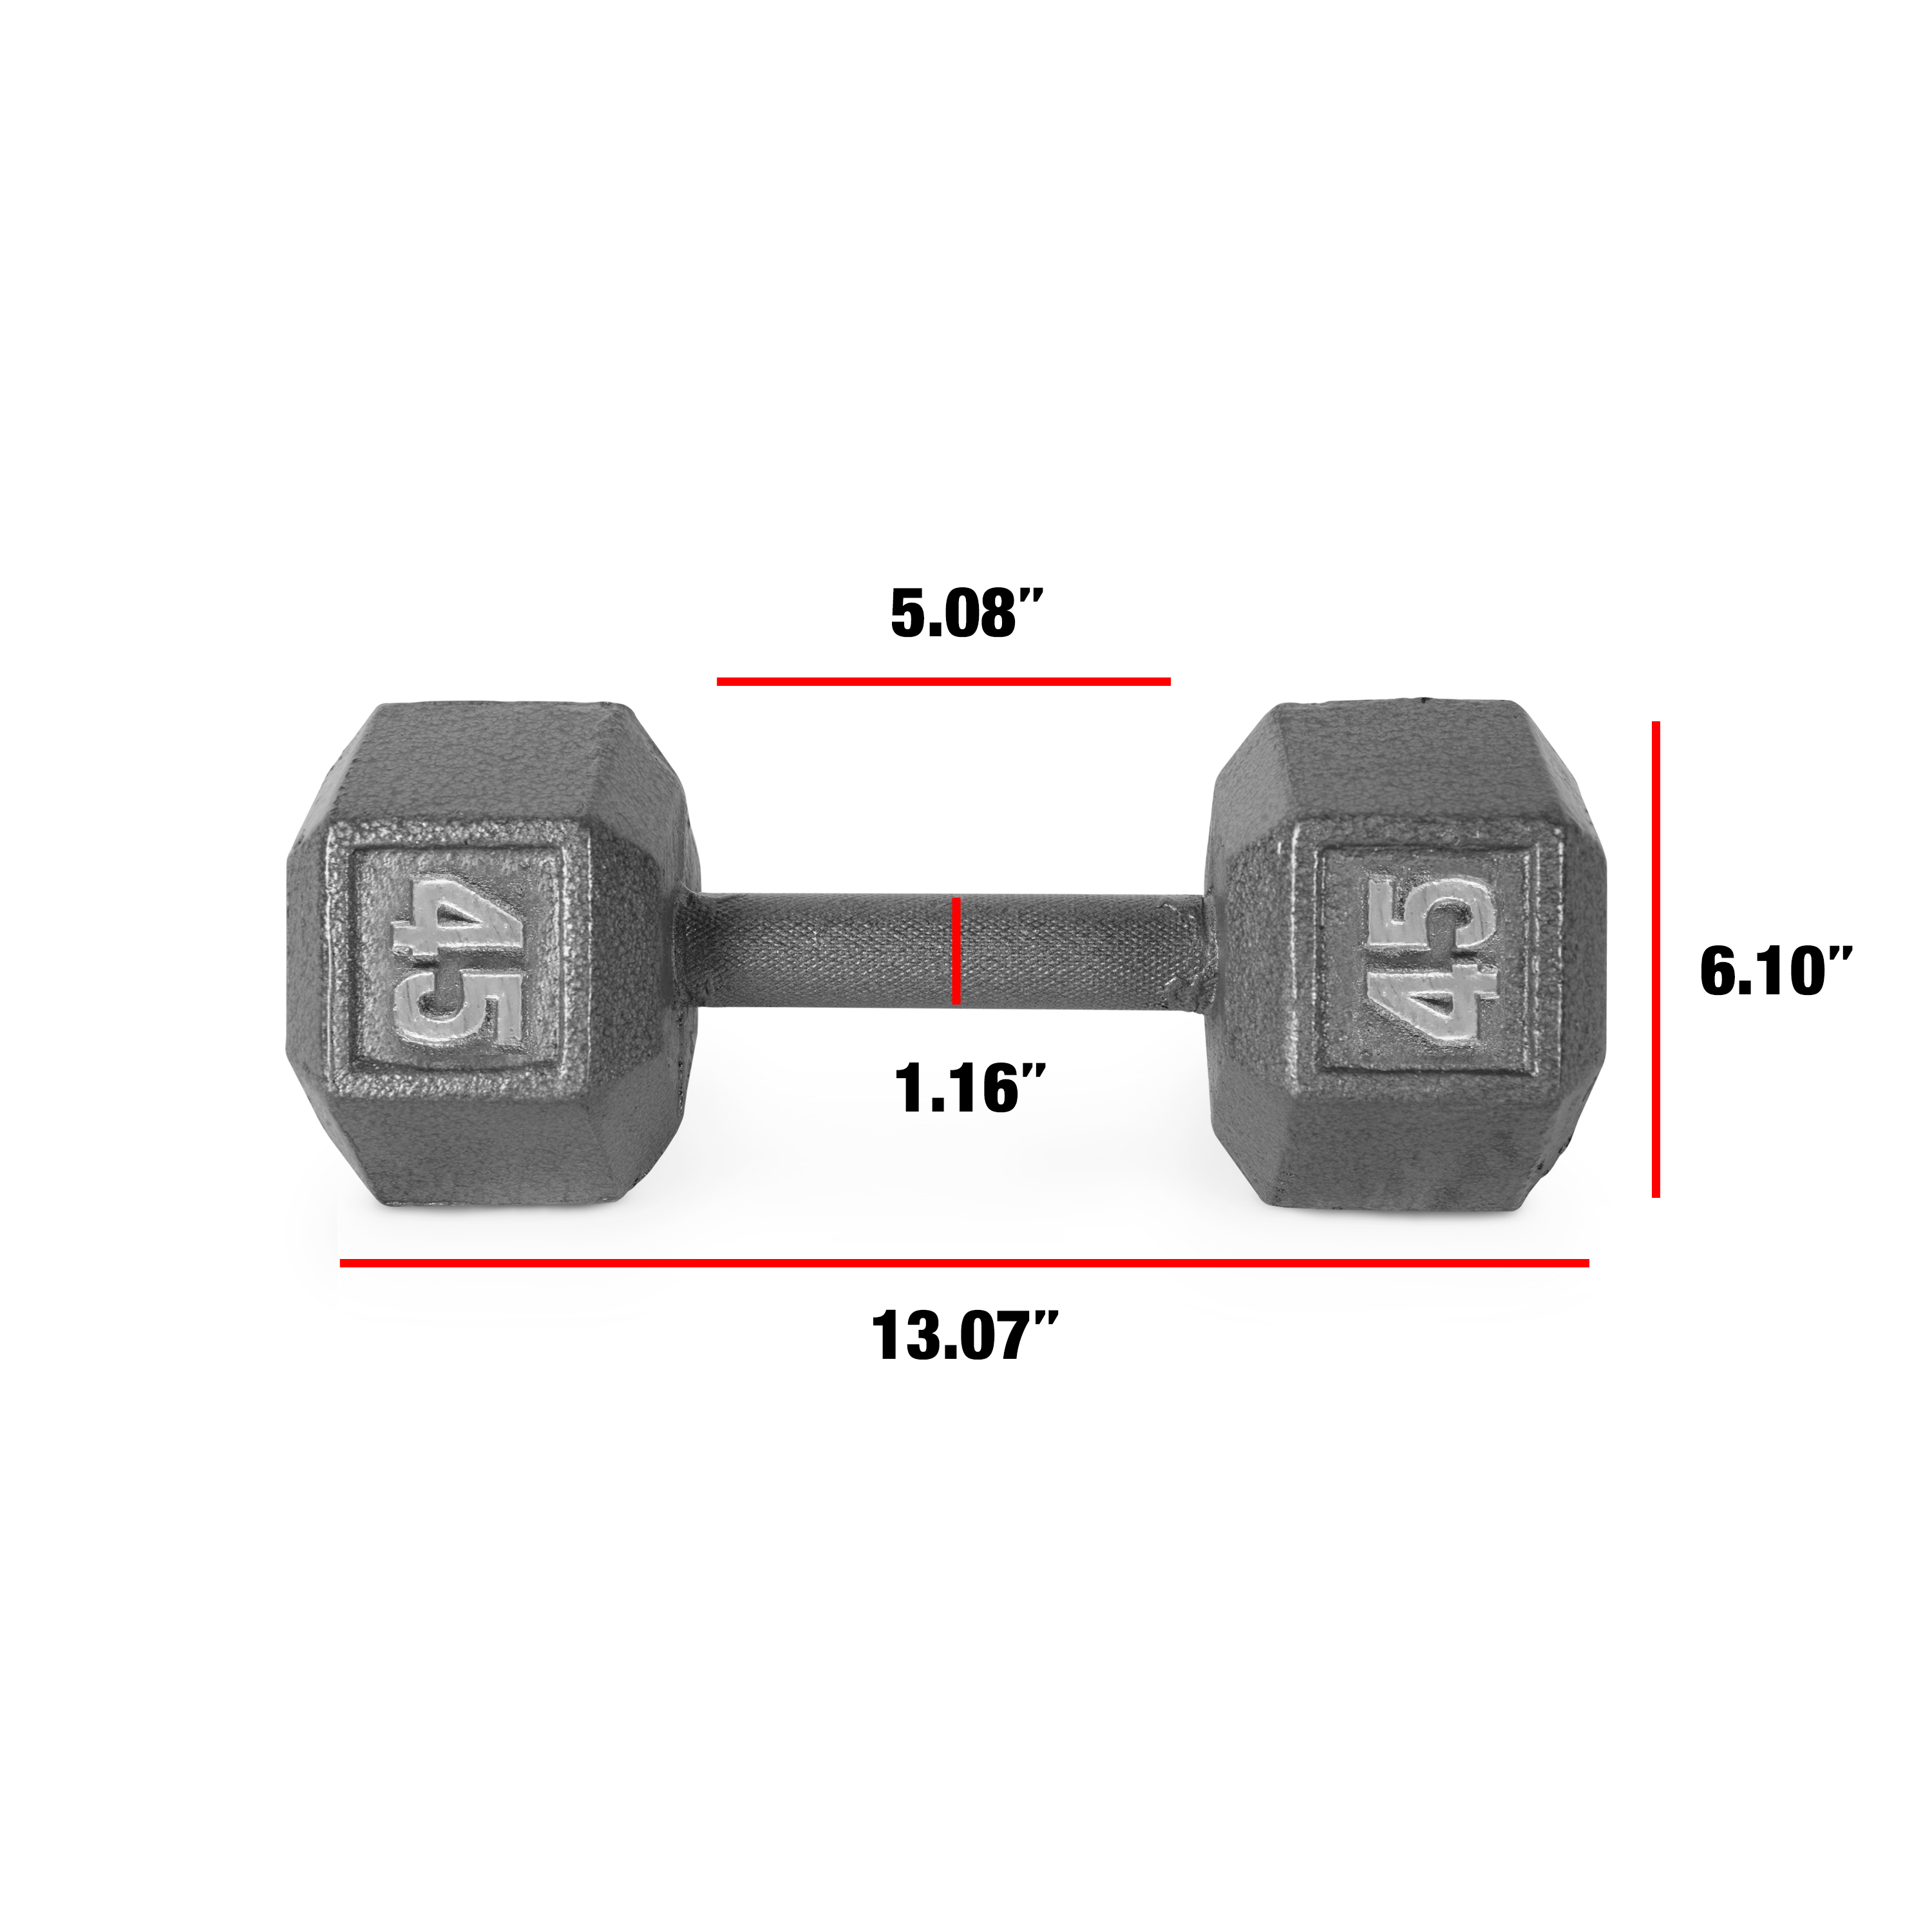 CAP Barbell 45lb Cast Iron Hex Dumbbell, Single - image 5 of 6